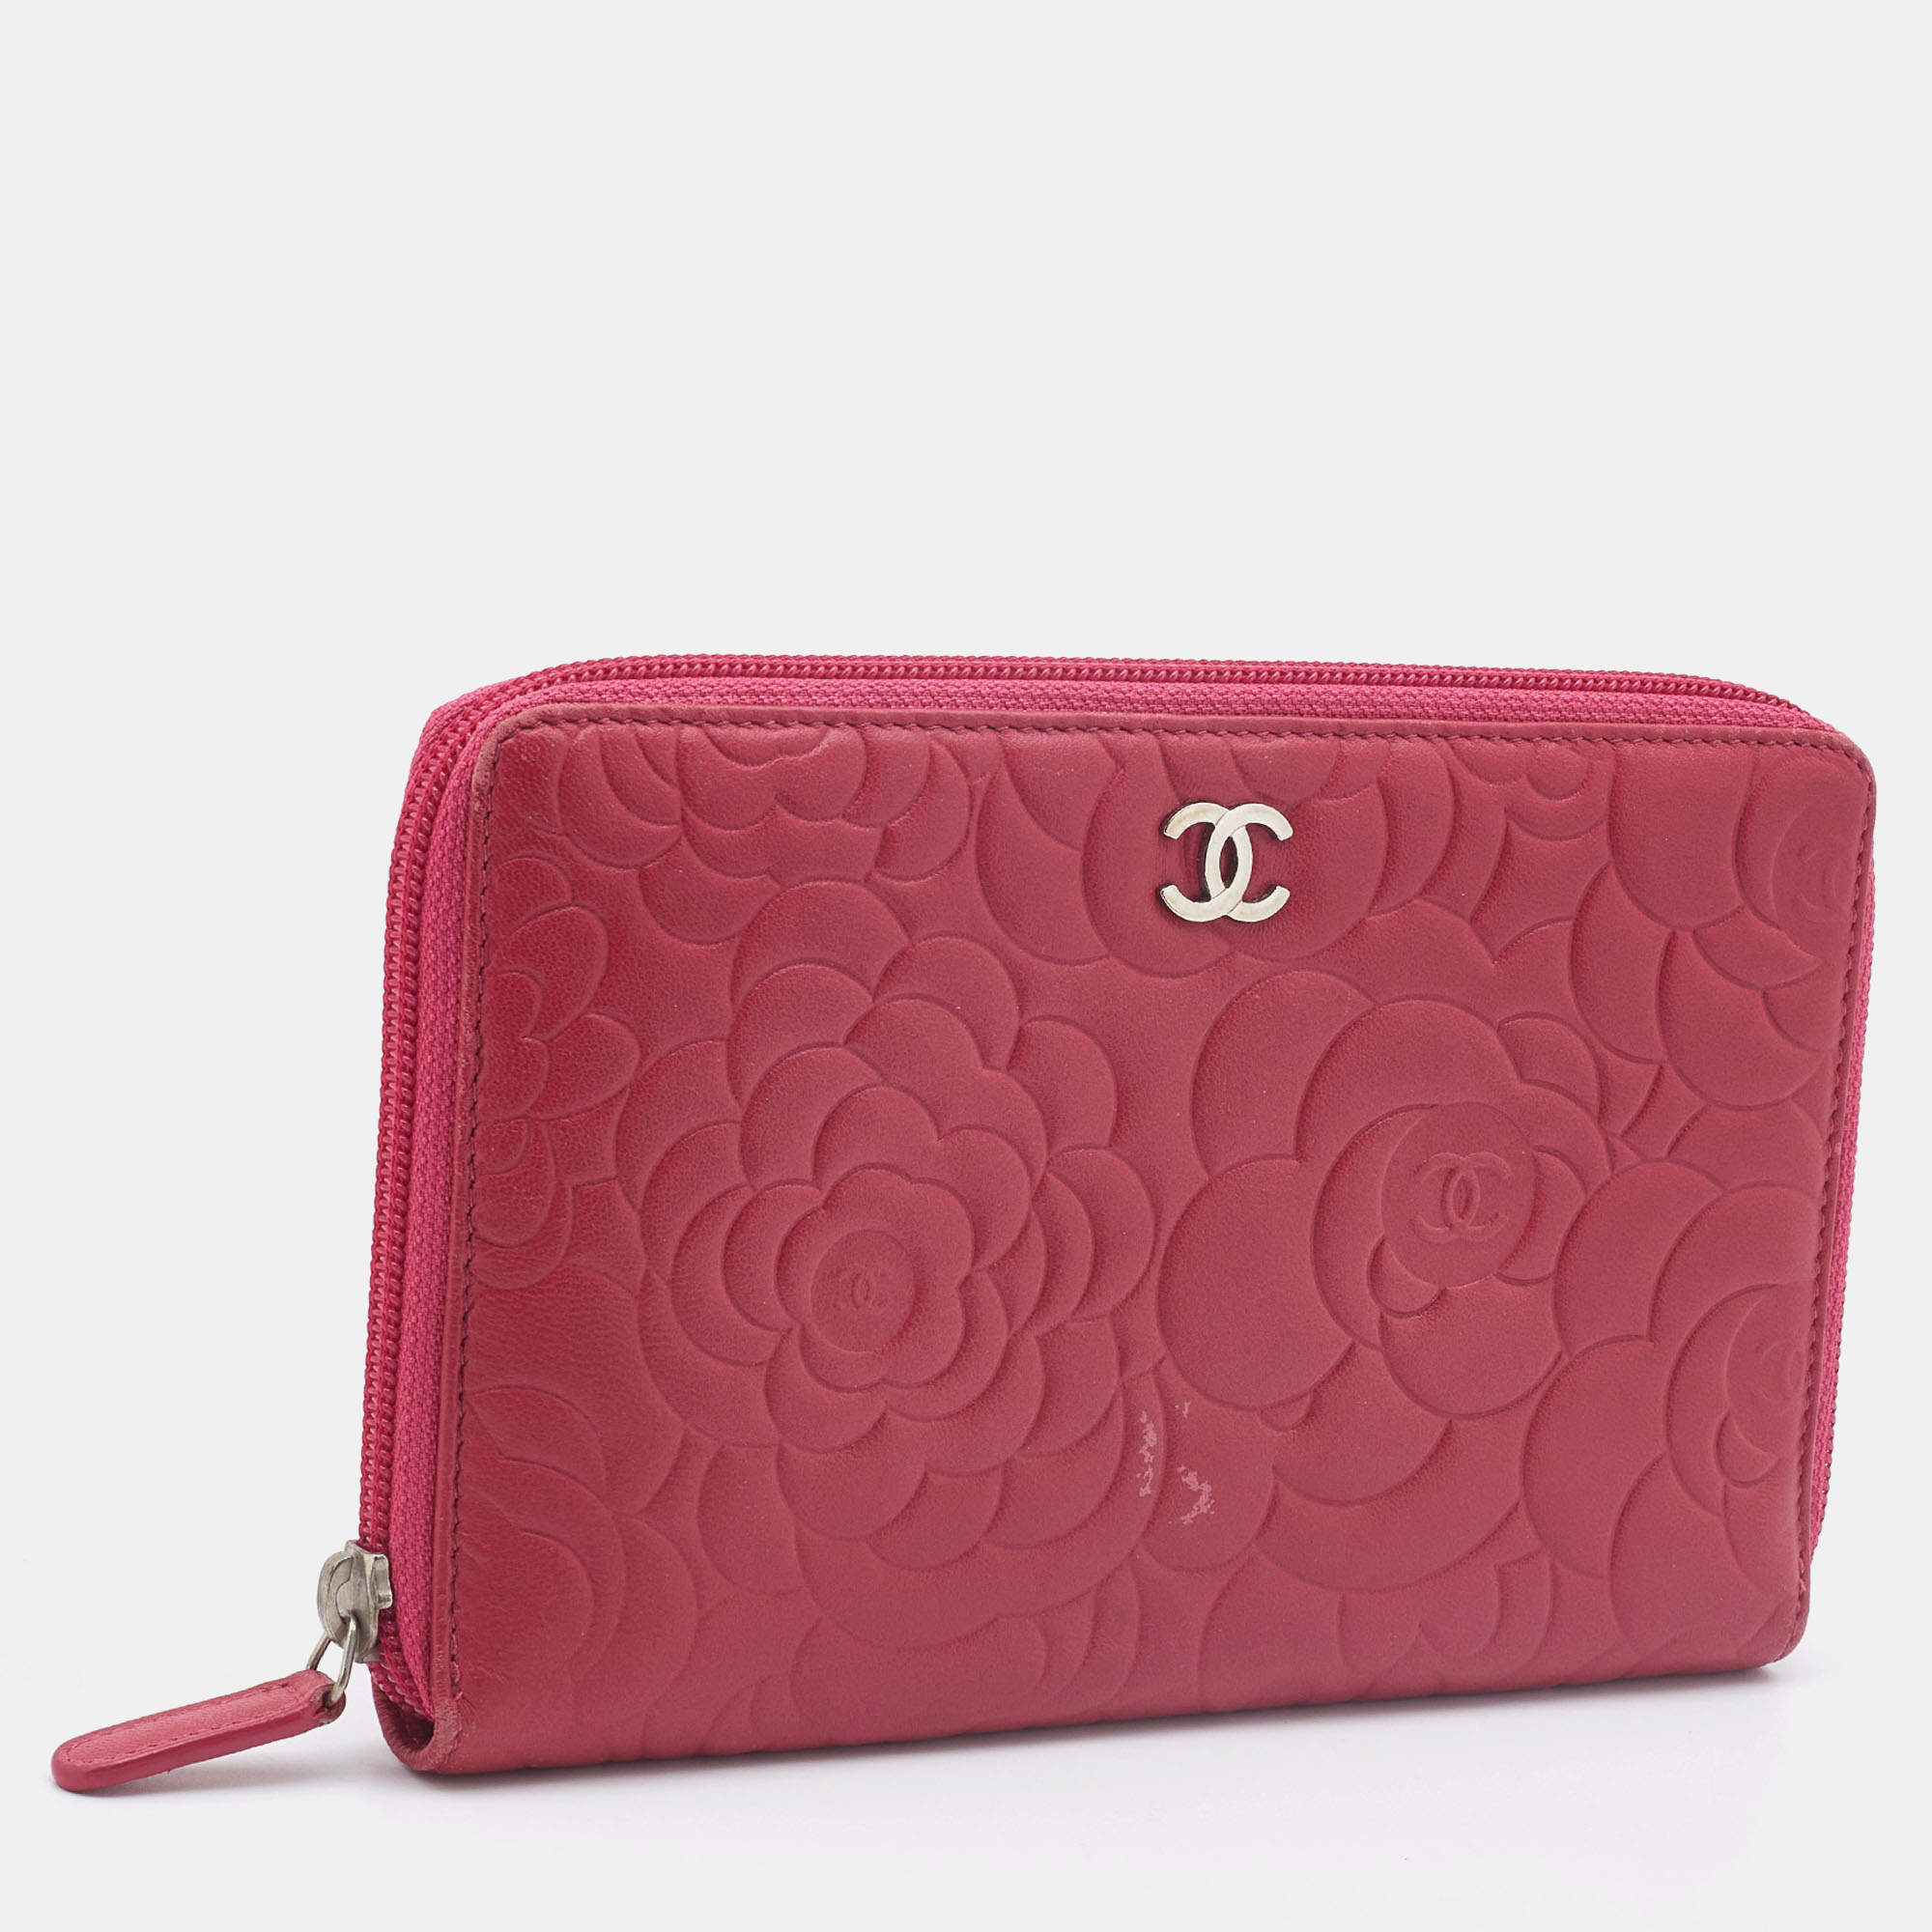 Chanel Zippy Embossed Leather Camellia Wallet